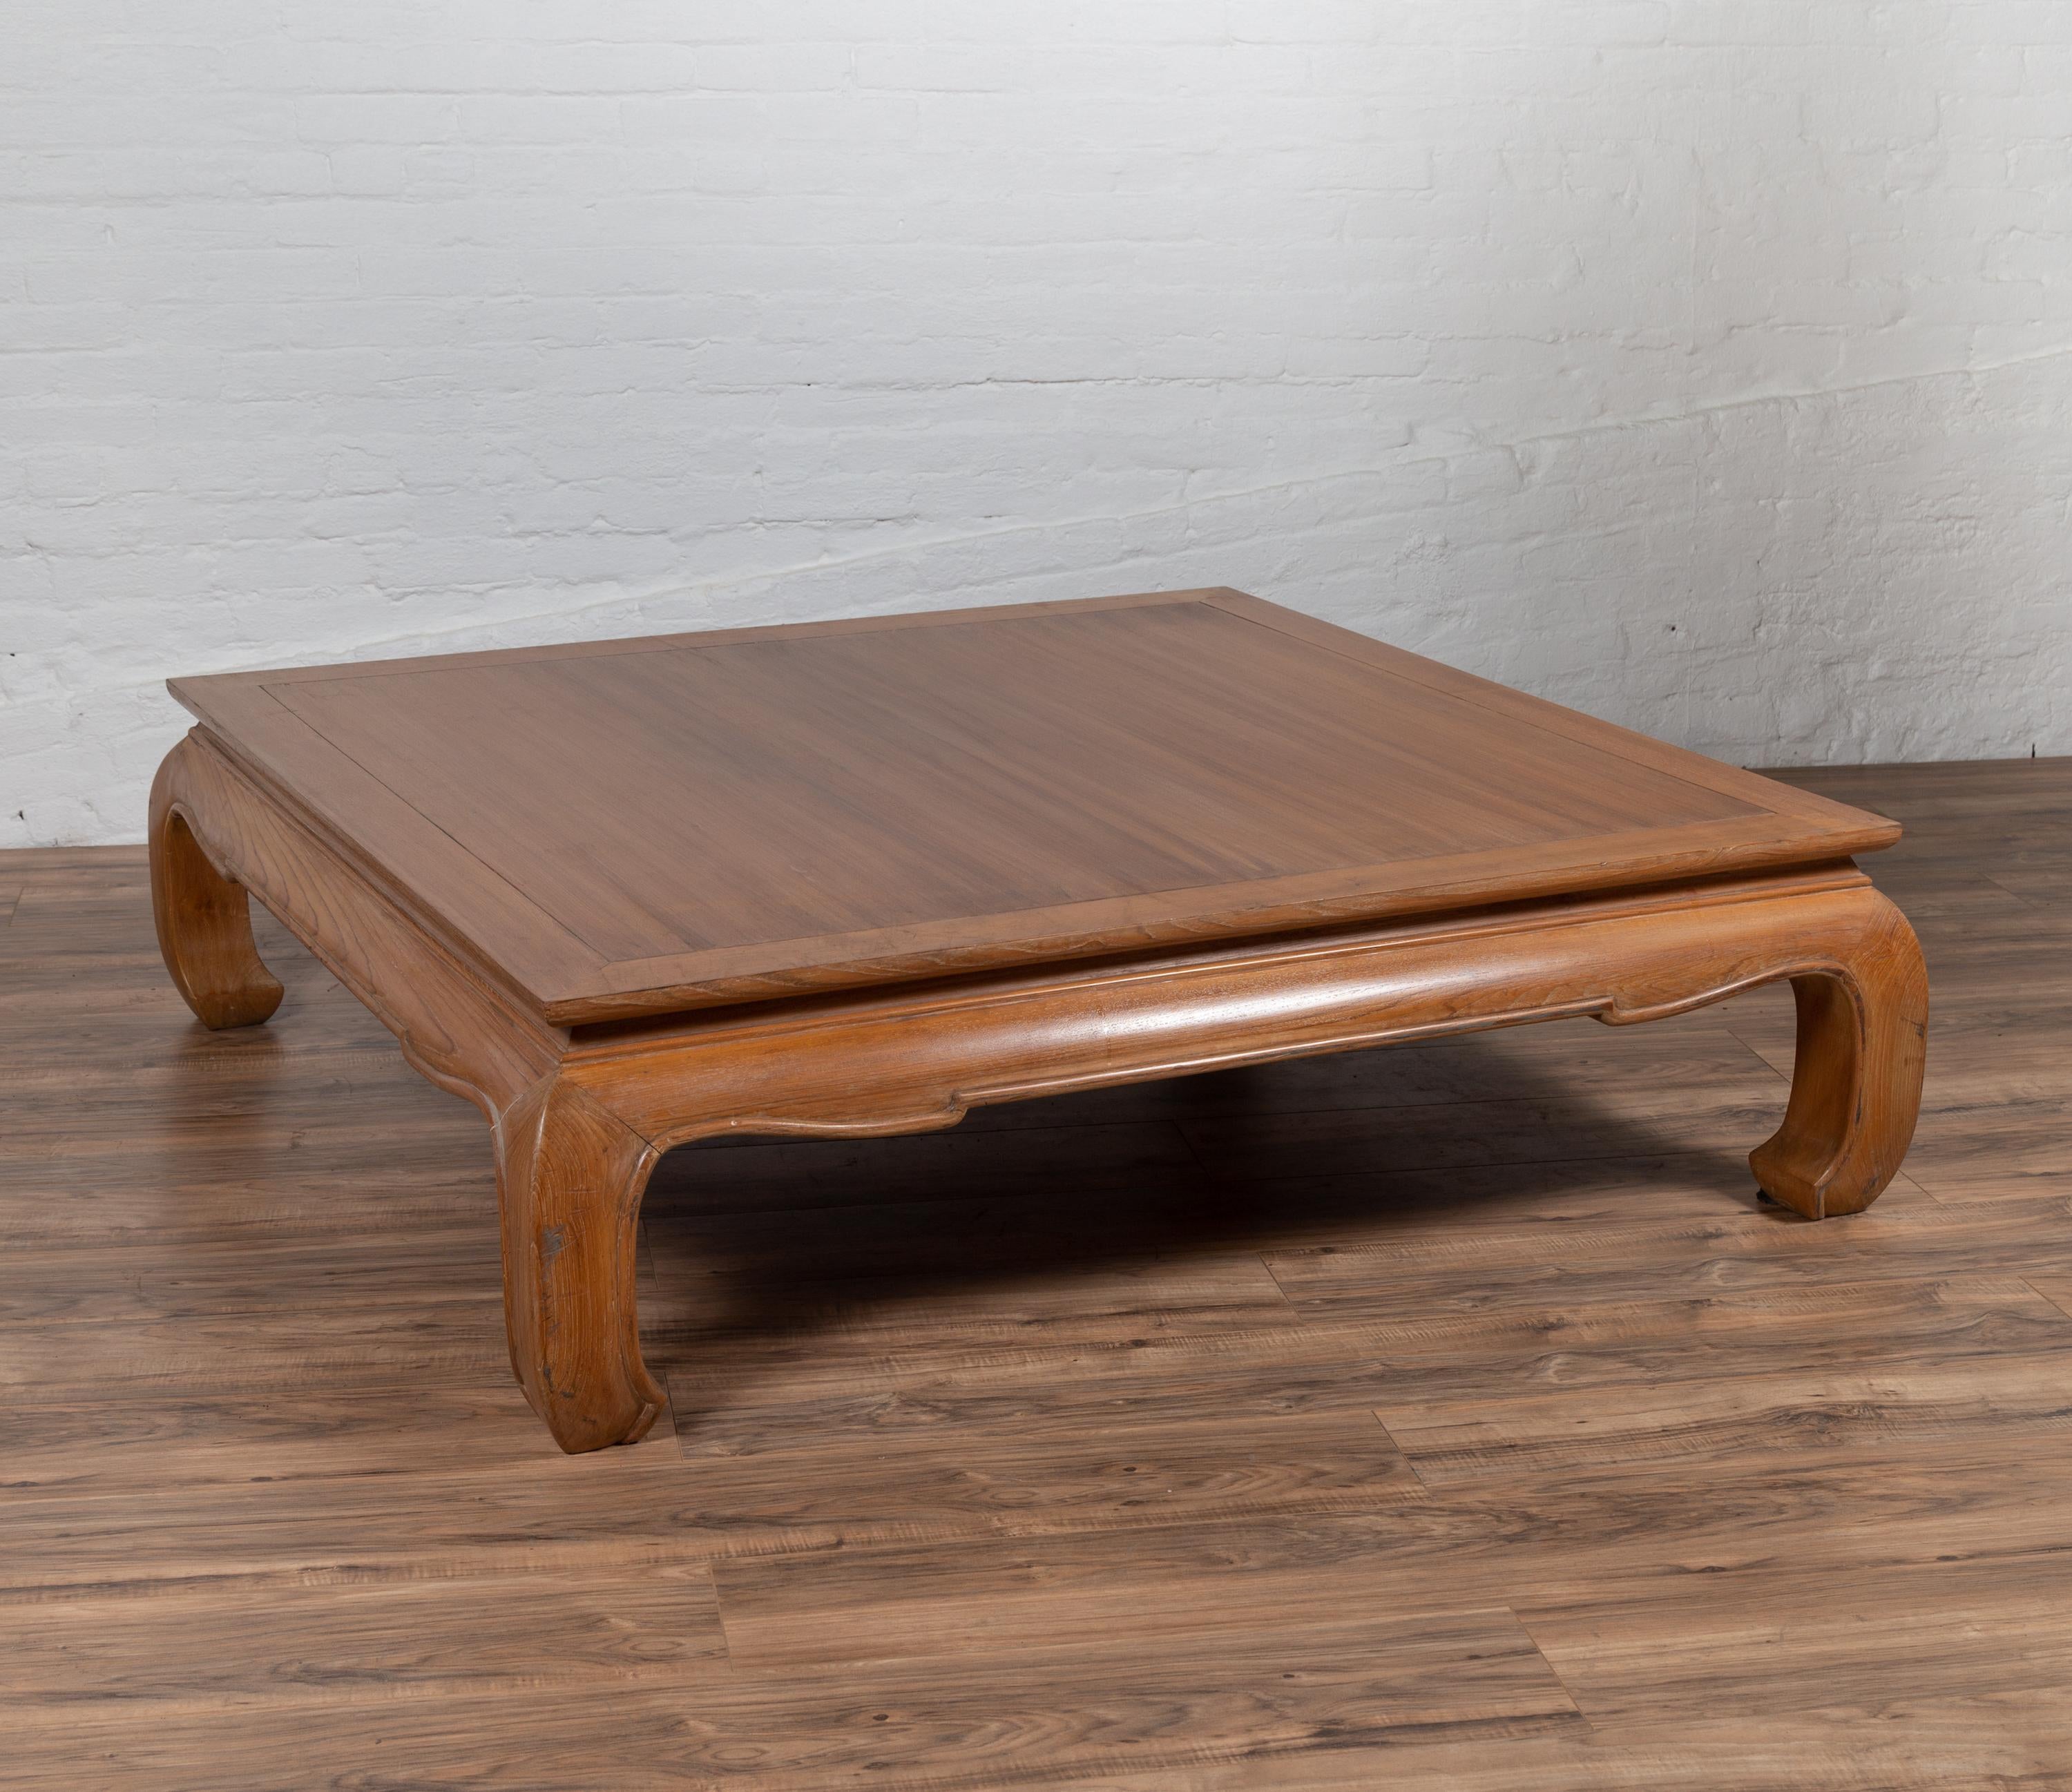 20th Century Vintage Indonesian Teak Coffee Table with Natural Bleached Patina and Chow Legs